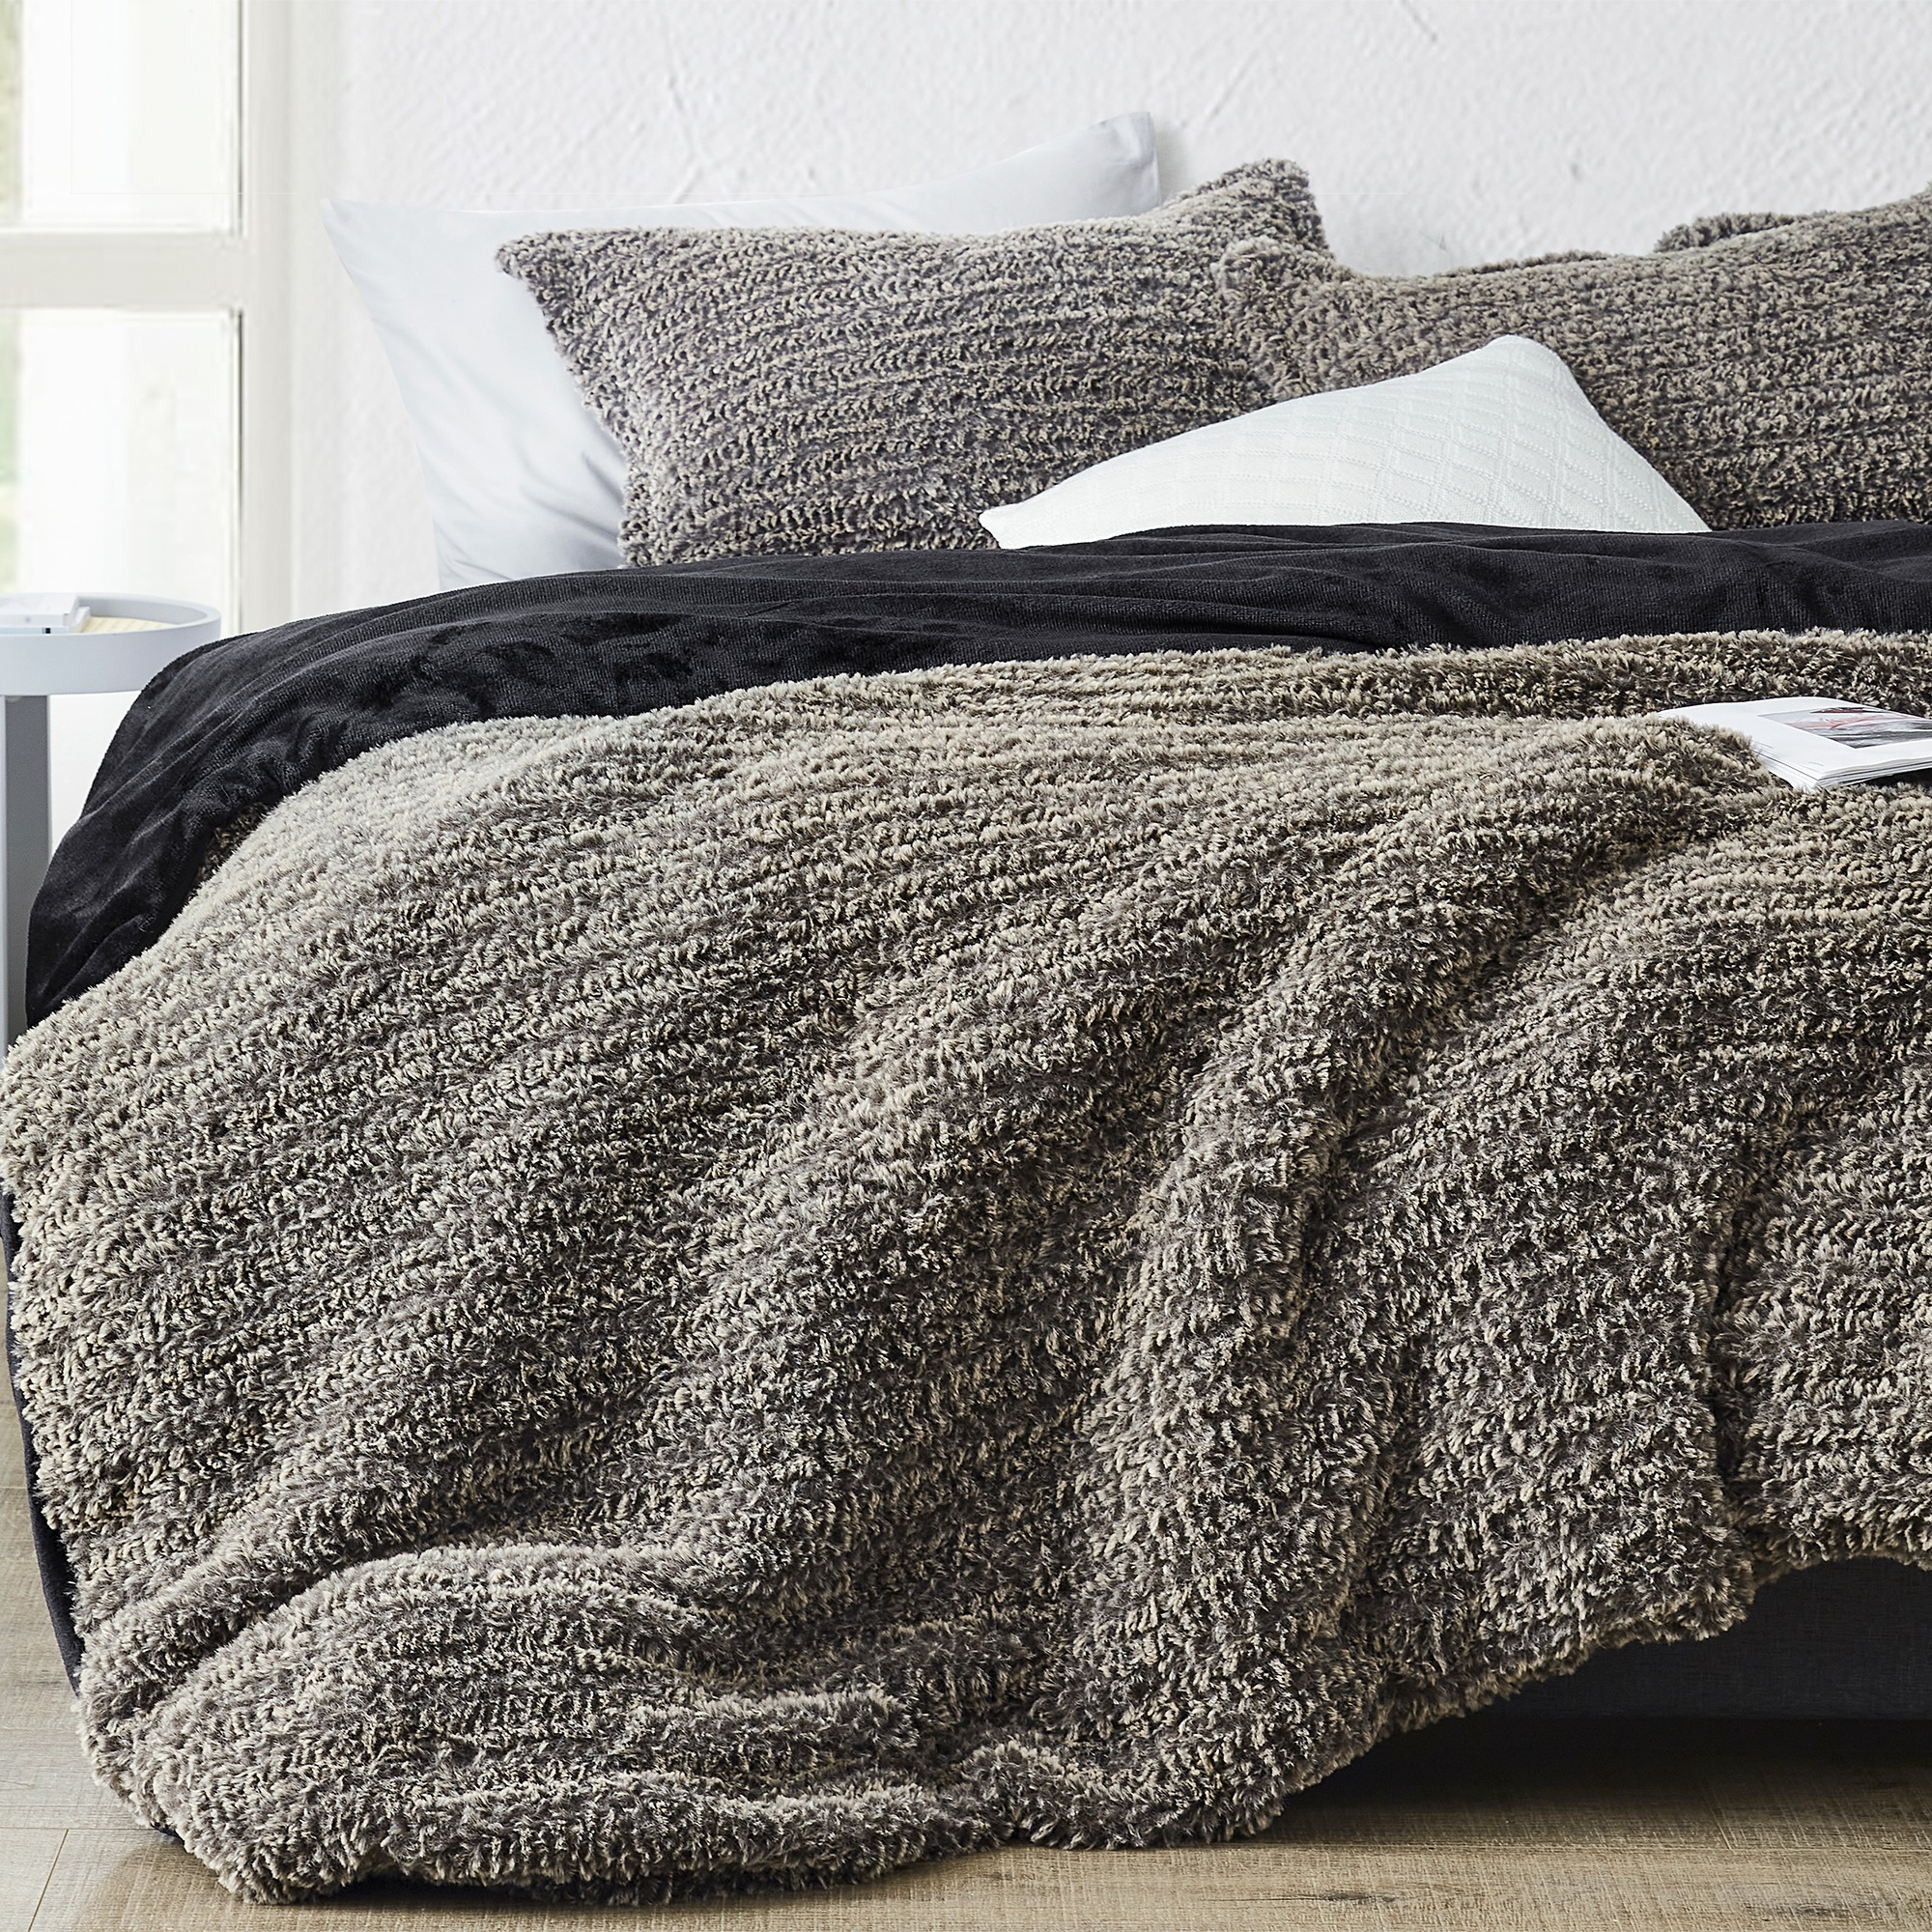 Holy - Coma Inducer Comforter - Black and Tan